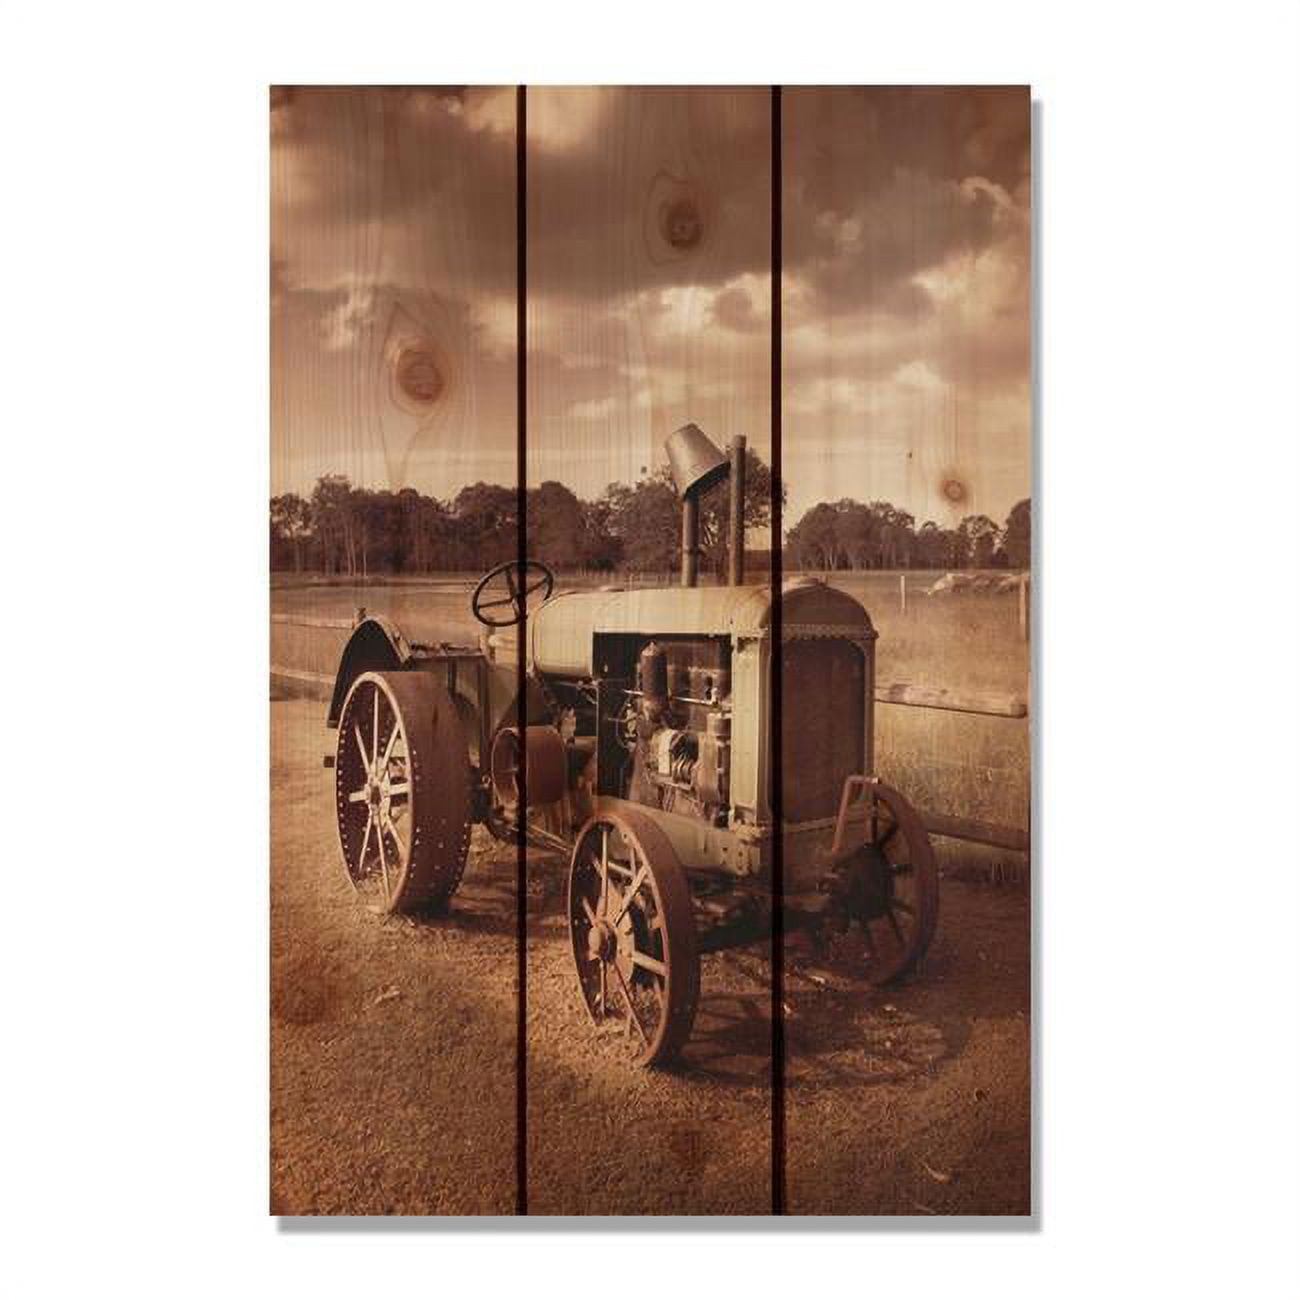 Daydream Toy Day Dream HQ BW1624 16 x 24 in. Back When Inside &amp; Outside wood Wall Art